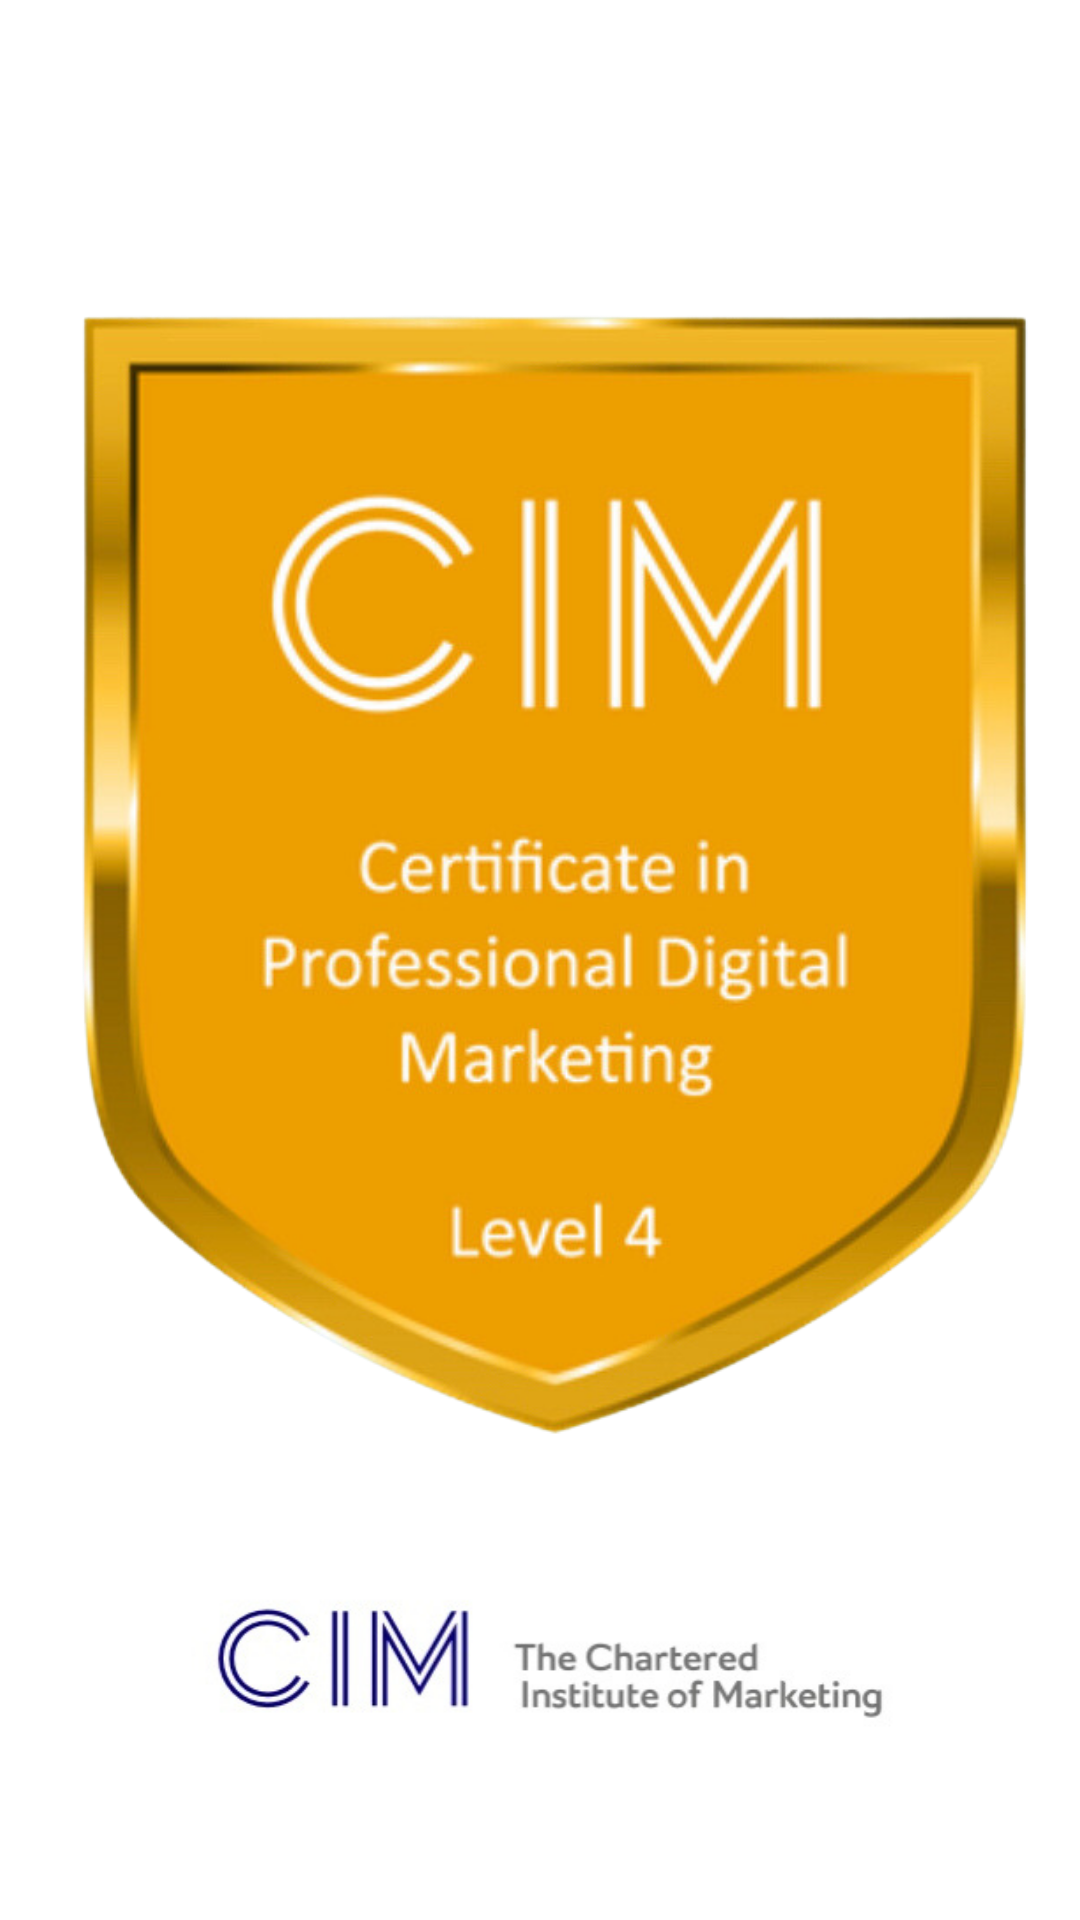 Certified with Chartered Institute of marketing